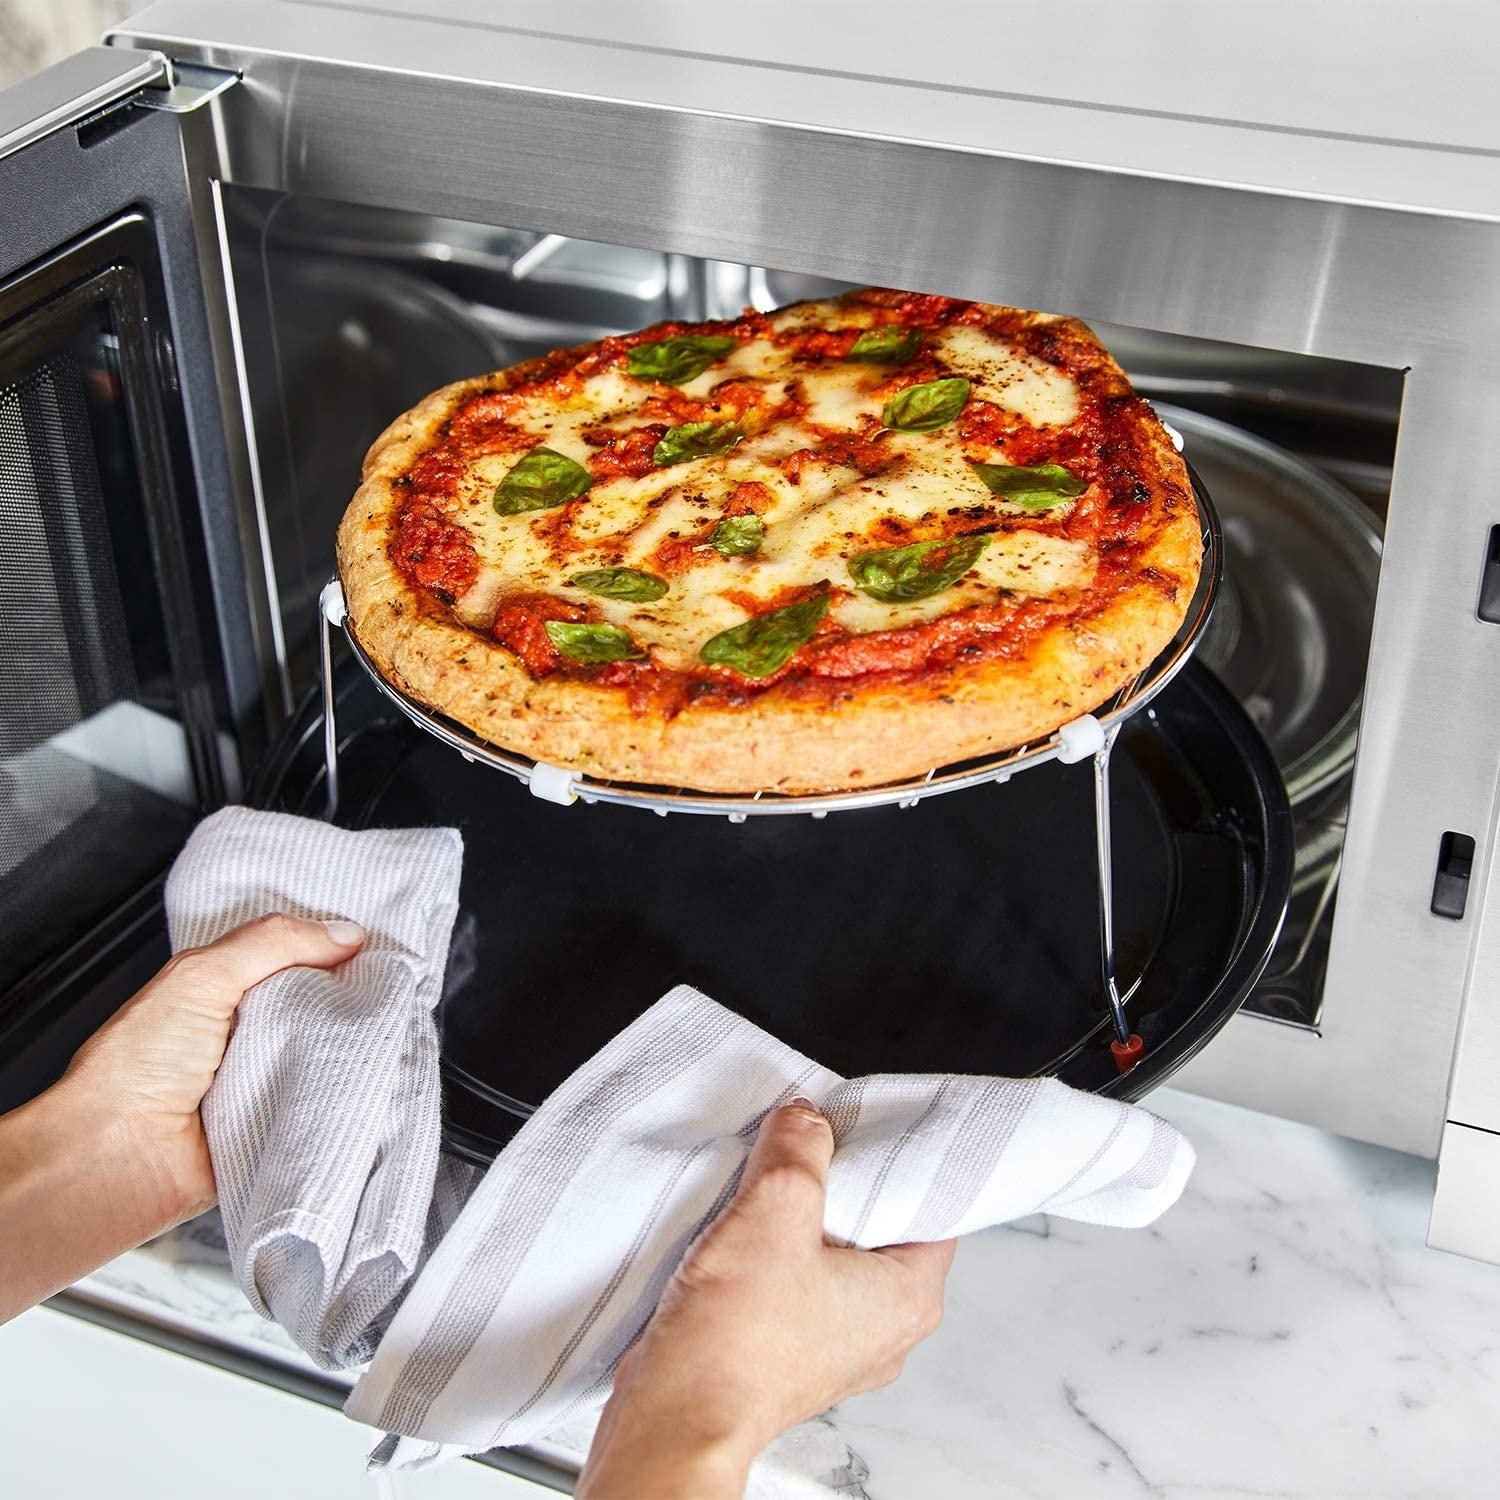 https://ak1.ostkcdn.com/images/products/is/images/direct/93791a95d21136572262506a08ca3e6924c308a2/Panasonic-HomeChef-4-in-1-Microwave-Oven-with-Air-Fryer.jpg